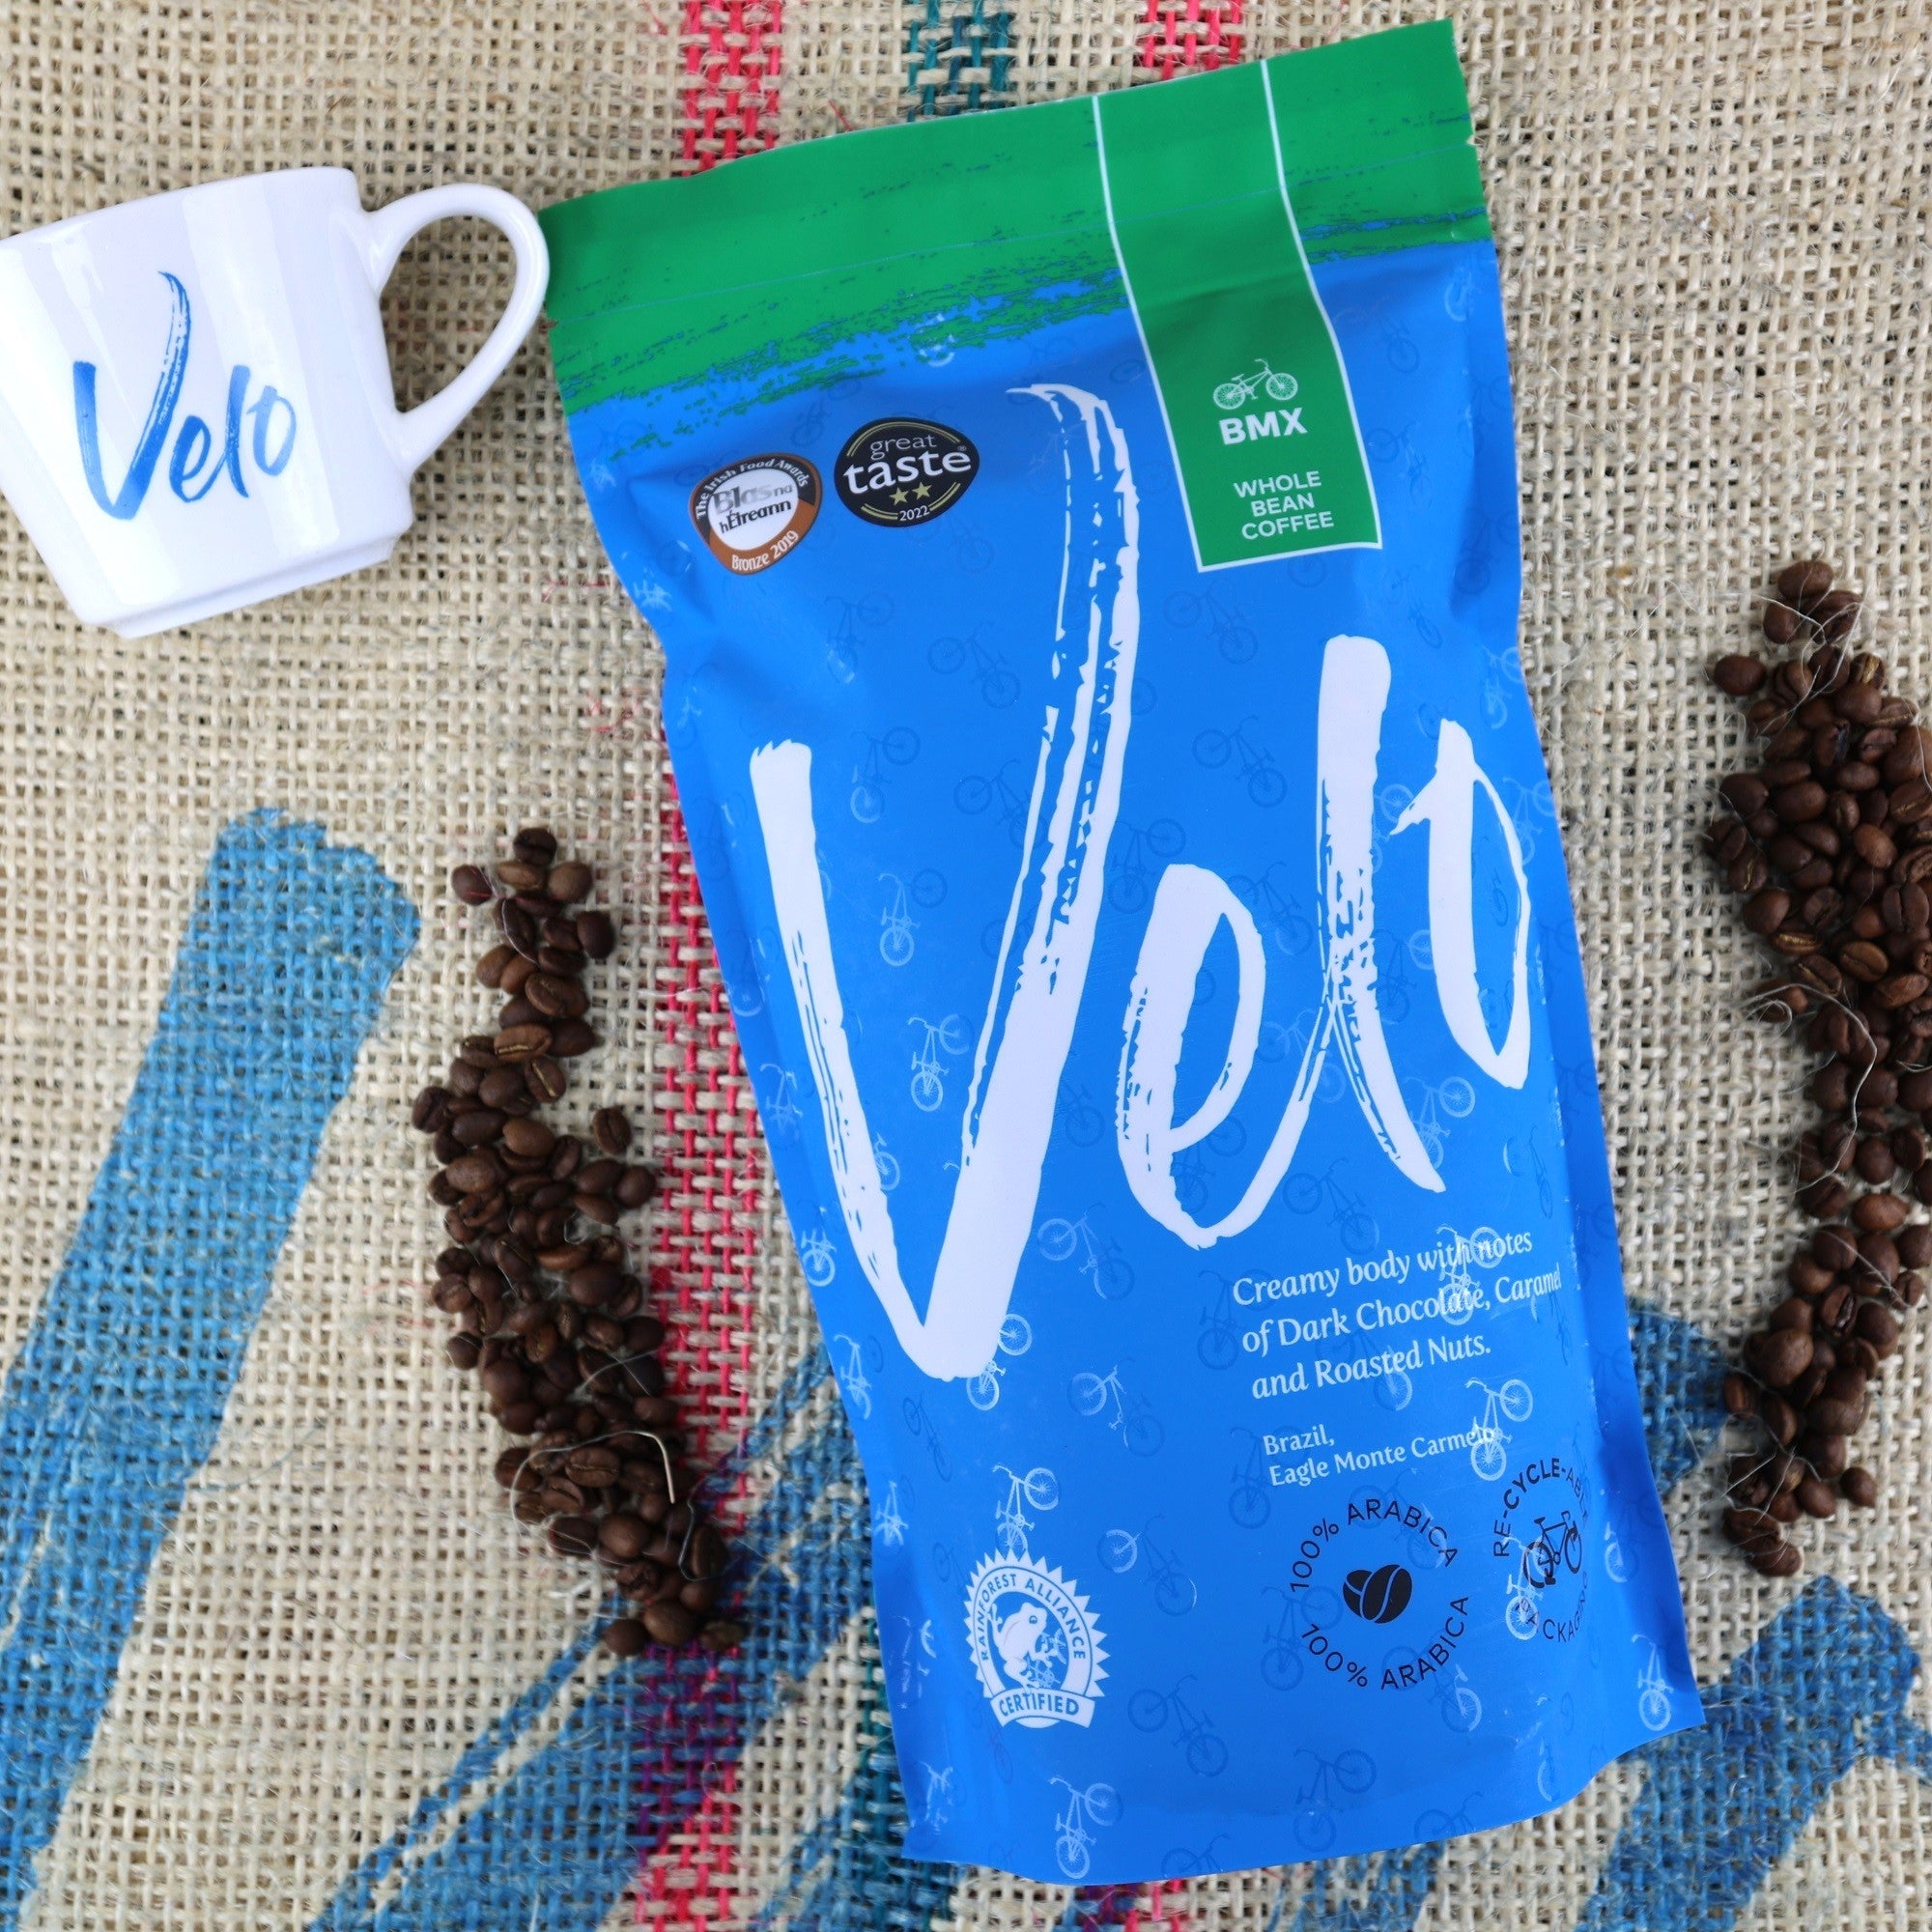 BMX 700g Brazil Coffee - Blue and Green Coffee Bag with White Velo Across the bag- Whole BEAN Velo Coffee Roasters